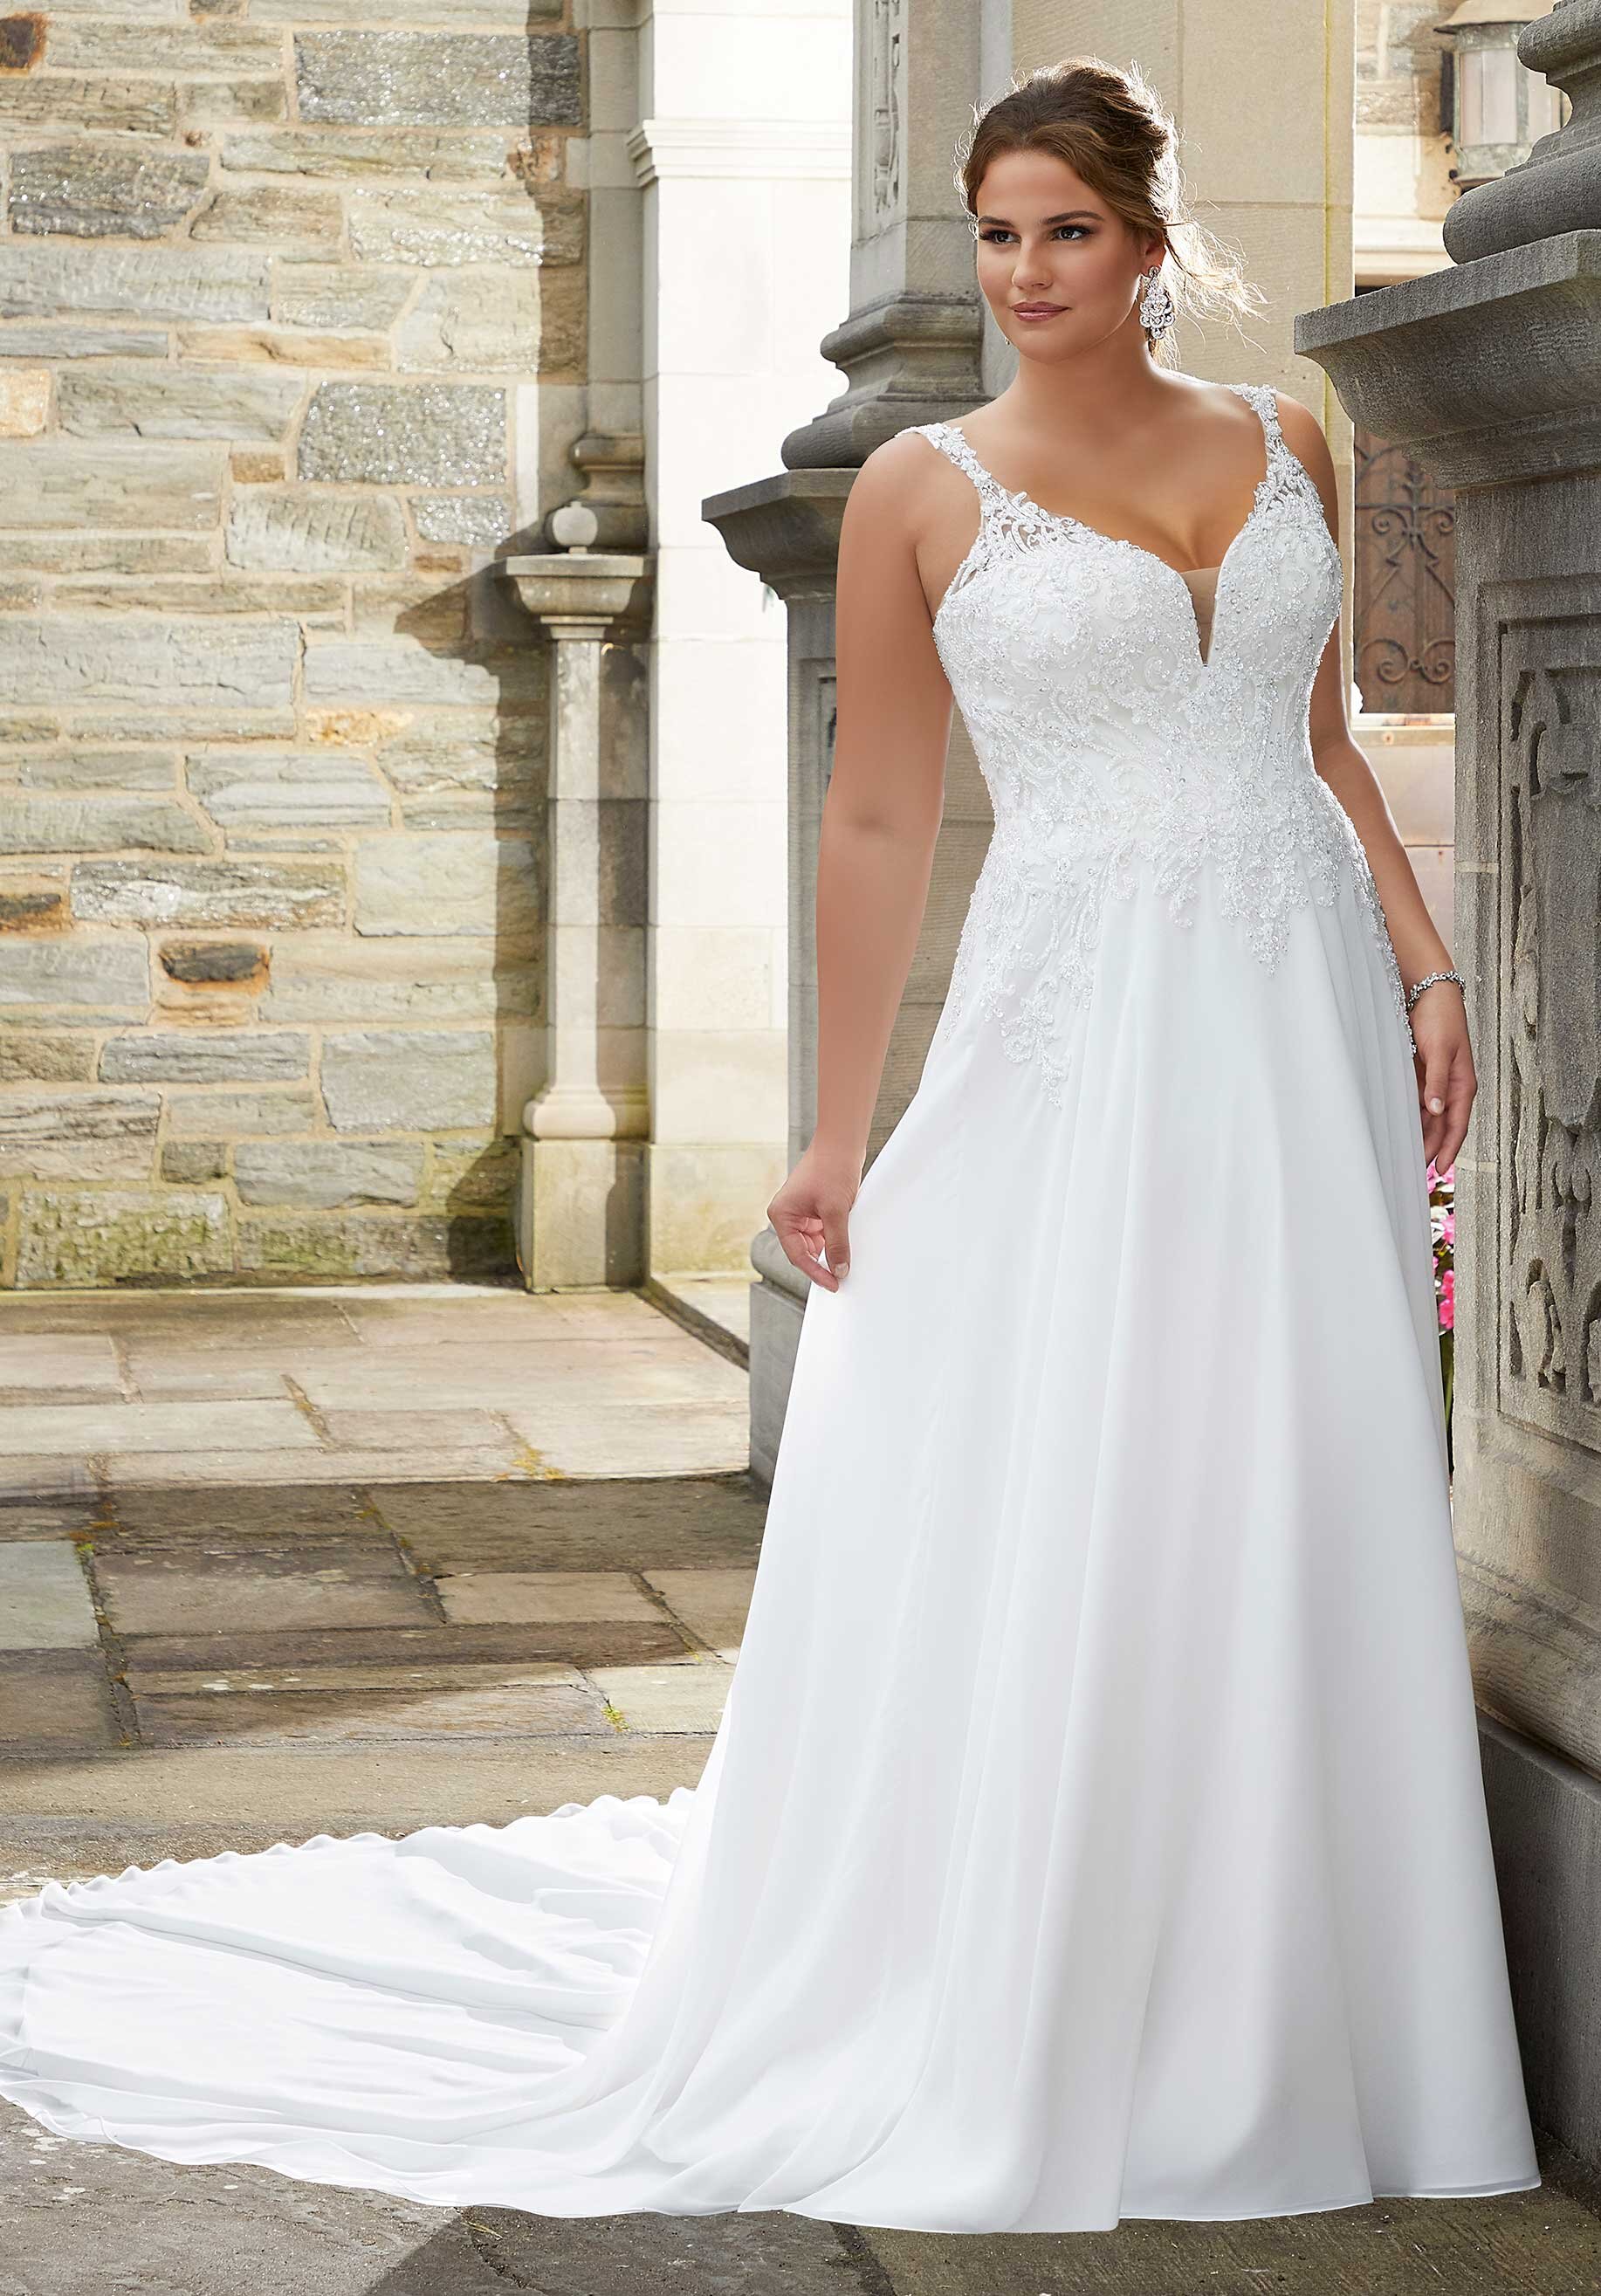 Brides-by-Young-Curvy-Plus-Size-Bridal-Chicago-Illinois-Indianapolis-Indiana-New-Jersey-Morilee-3282-Slyvia-Front.jpg